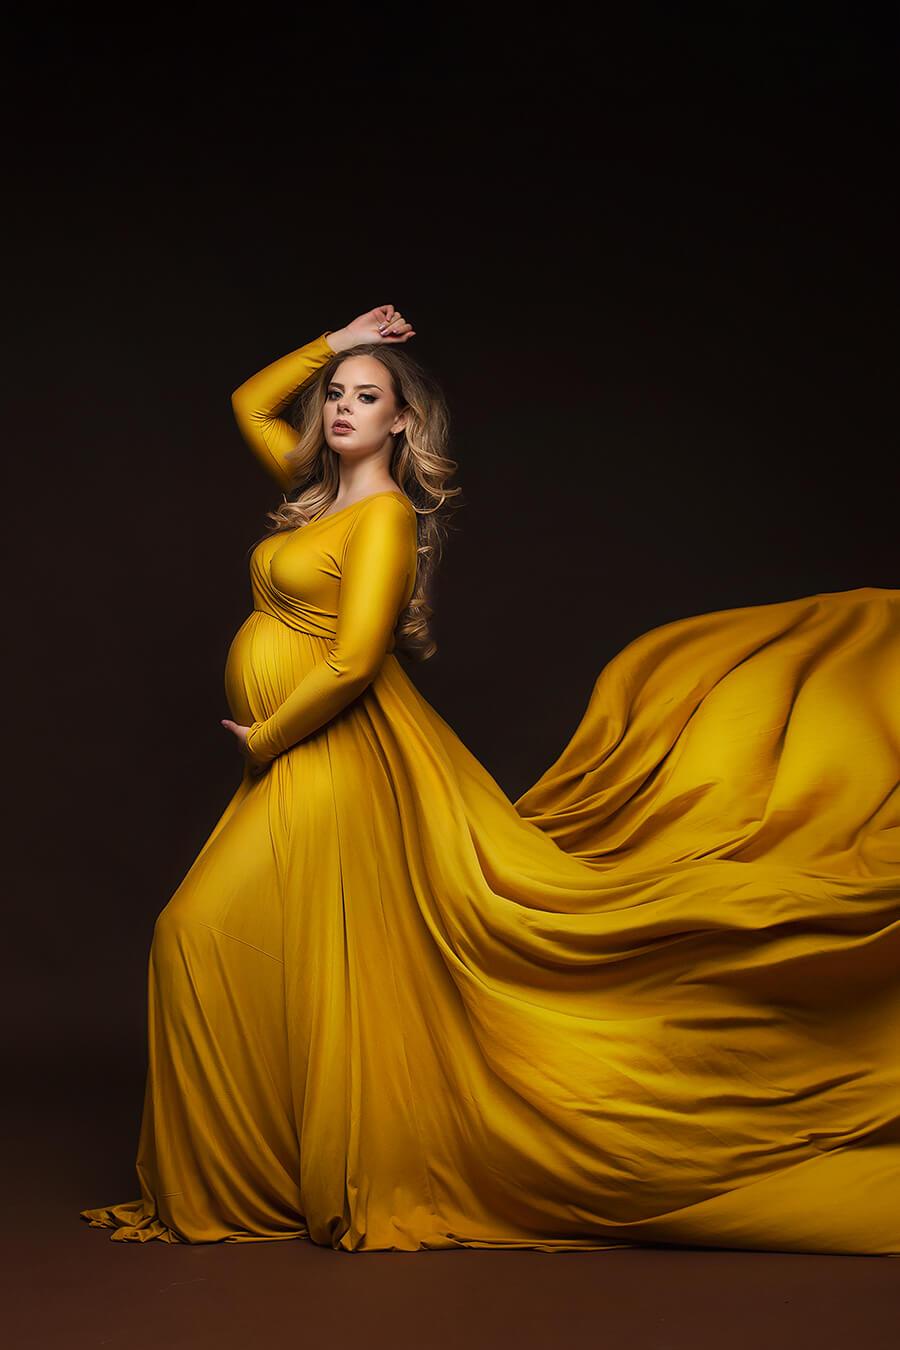 The model is wearing a long yellow dress. The skirt is verry big so in the picture is creating a long wave of dress